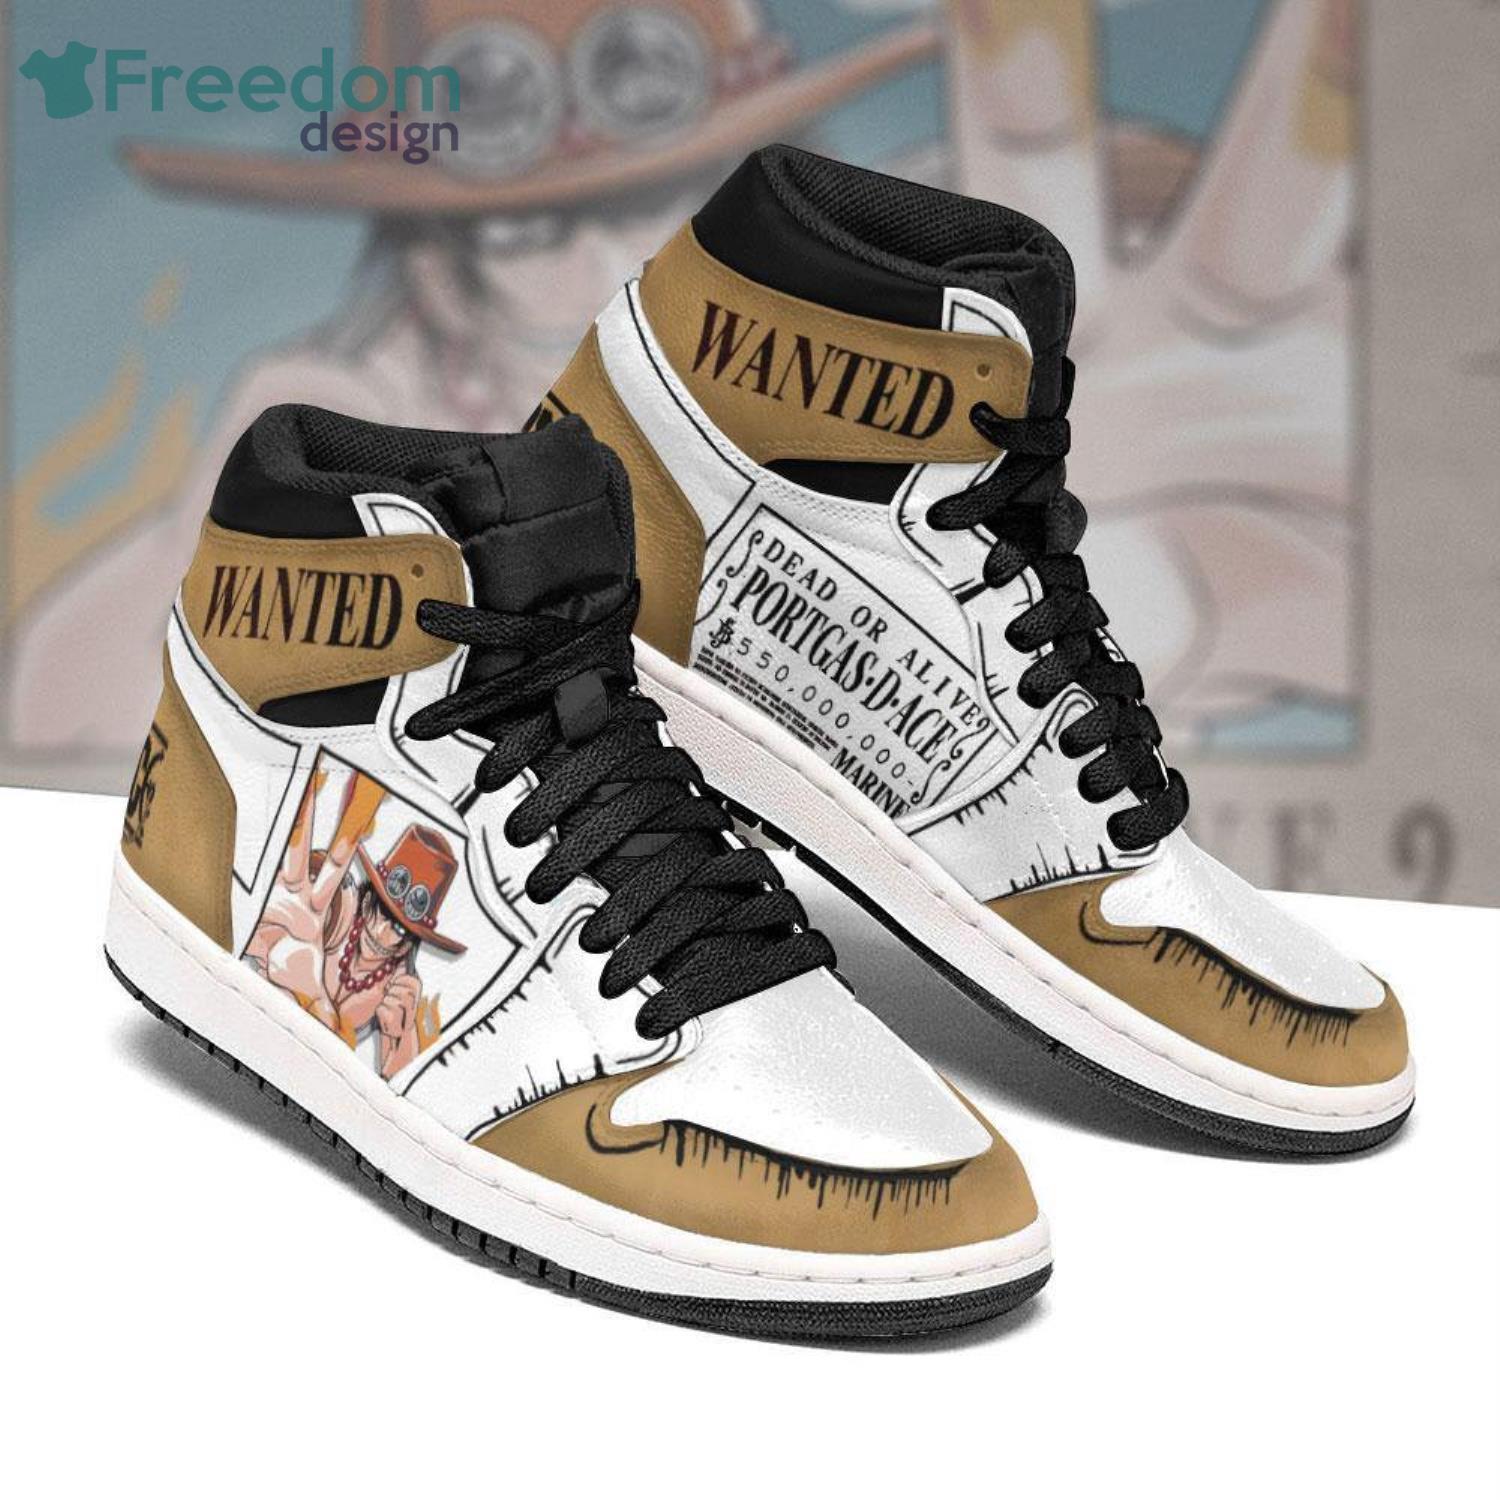 Portgas D Ace Wanted One Piece Anime Air Jordan Hightop Shoes